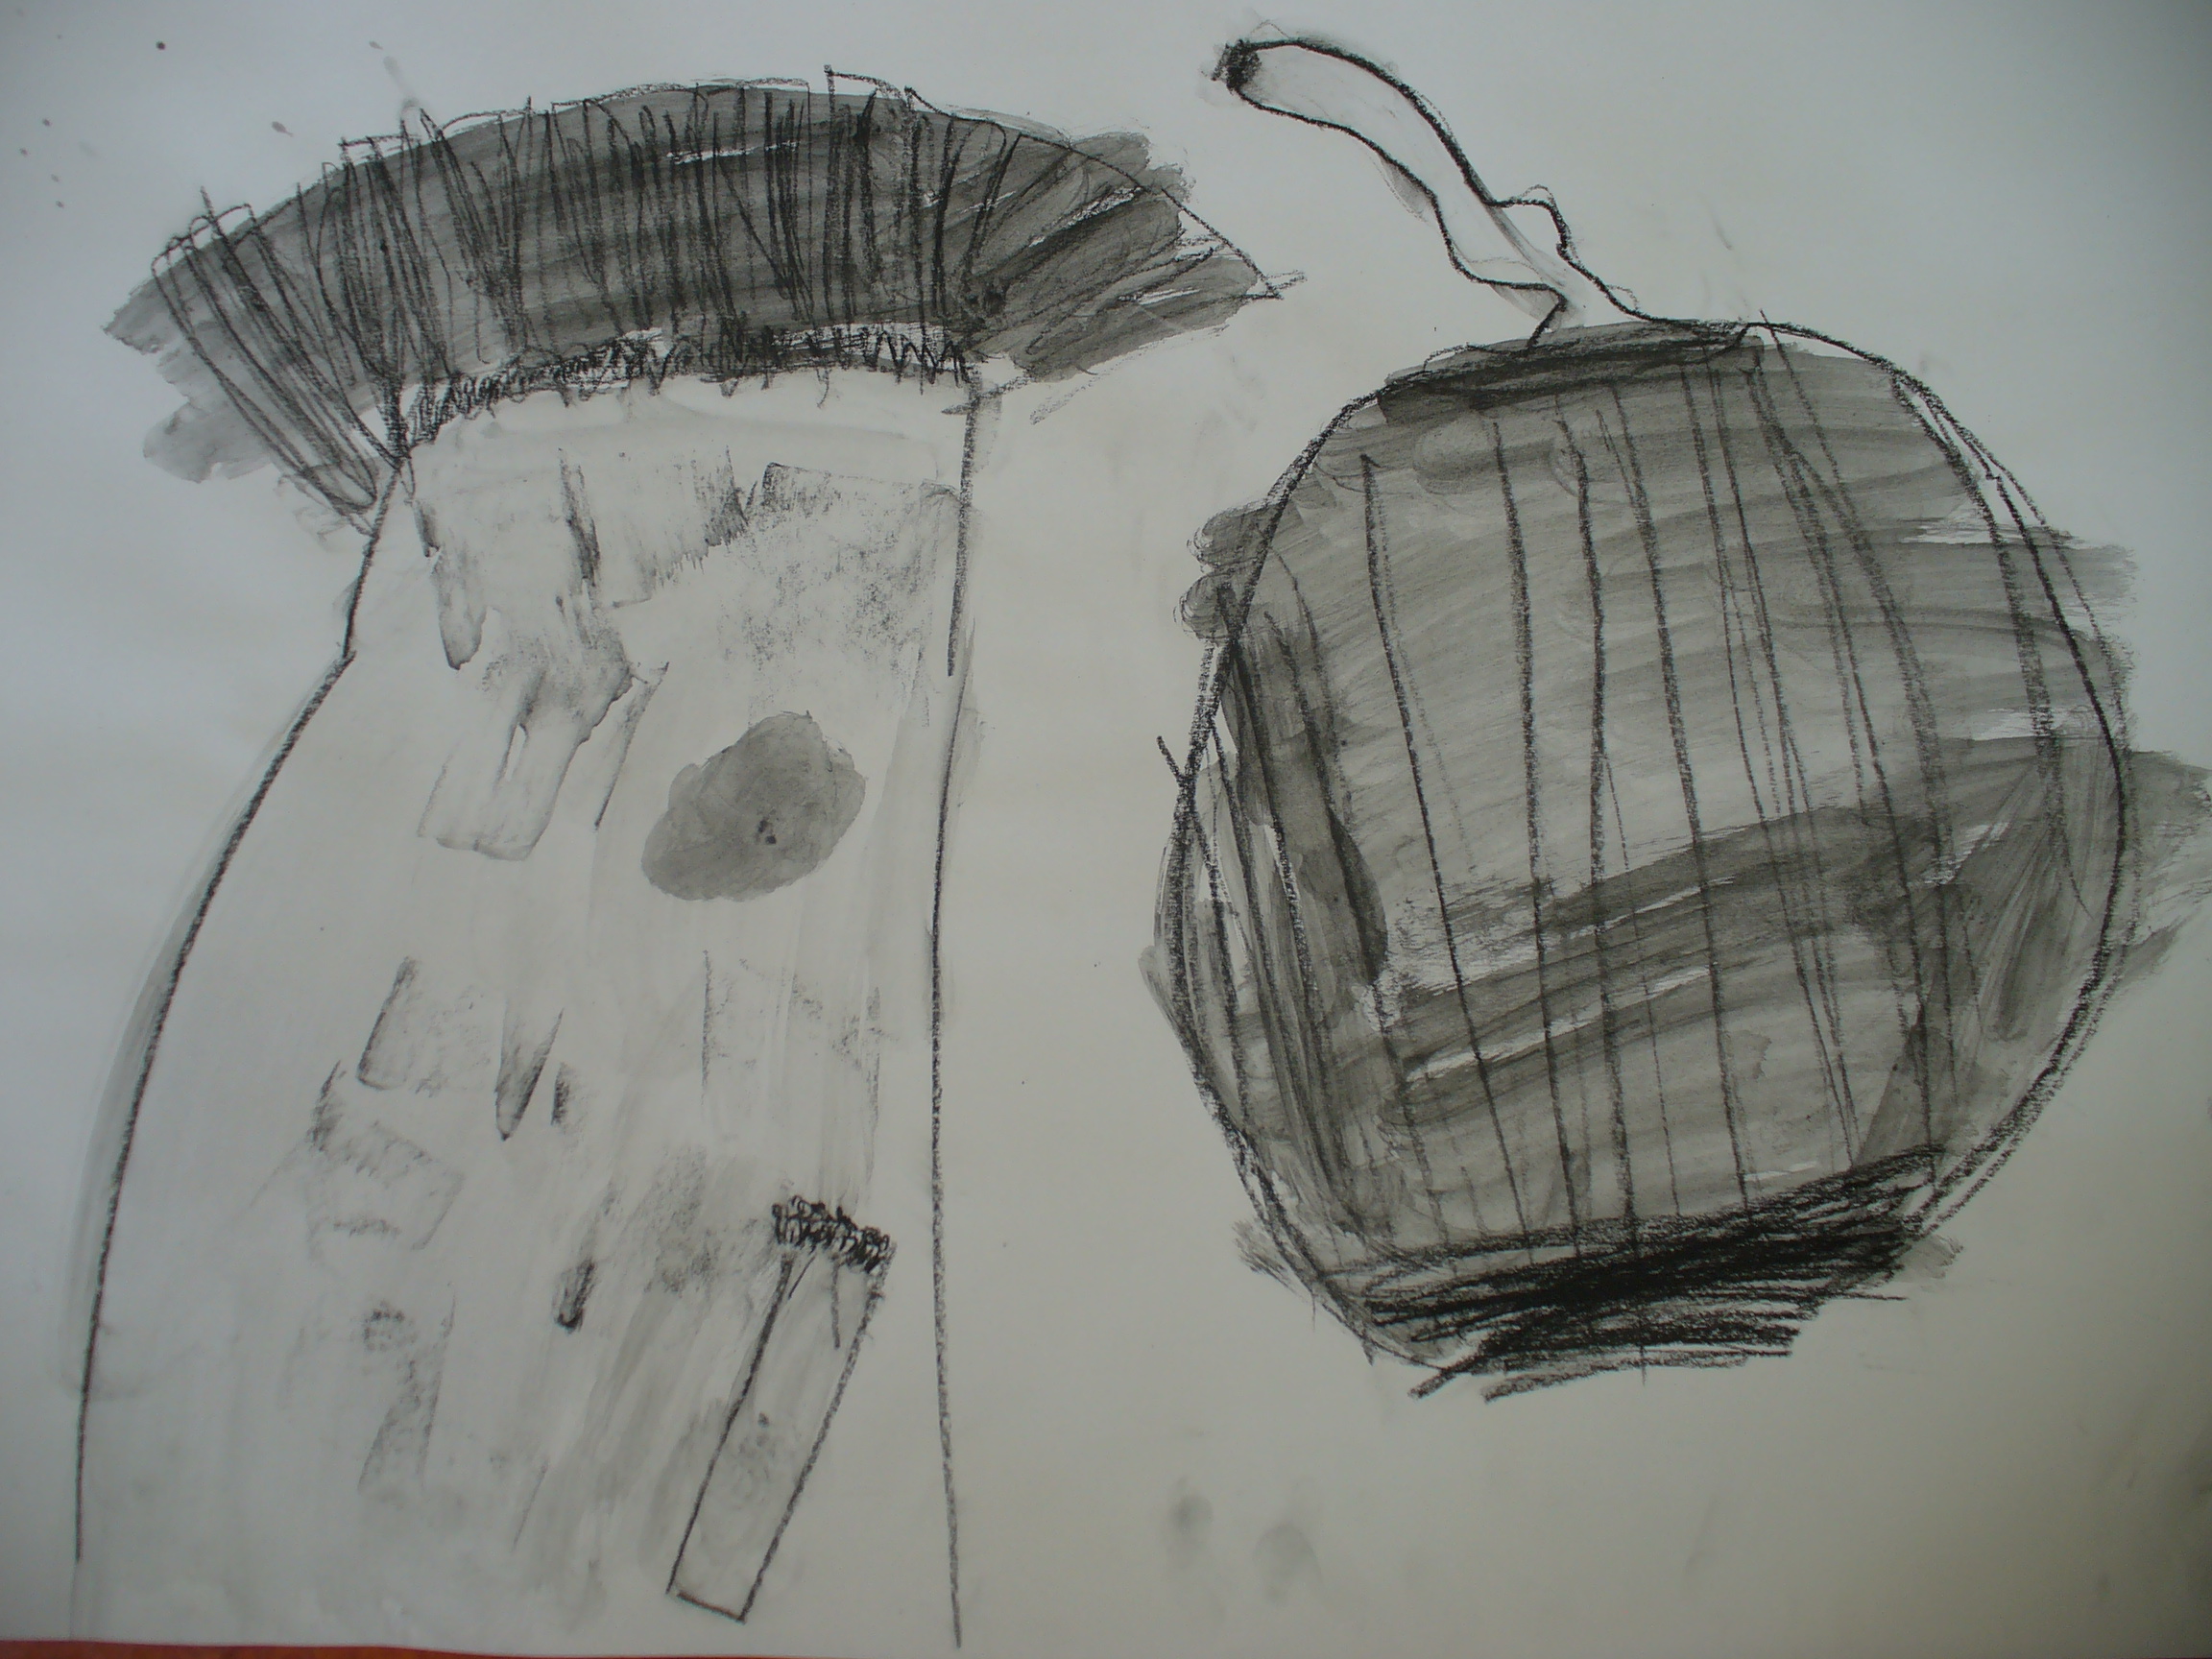 Compressed charcoal and water drawings by younger class